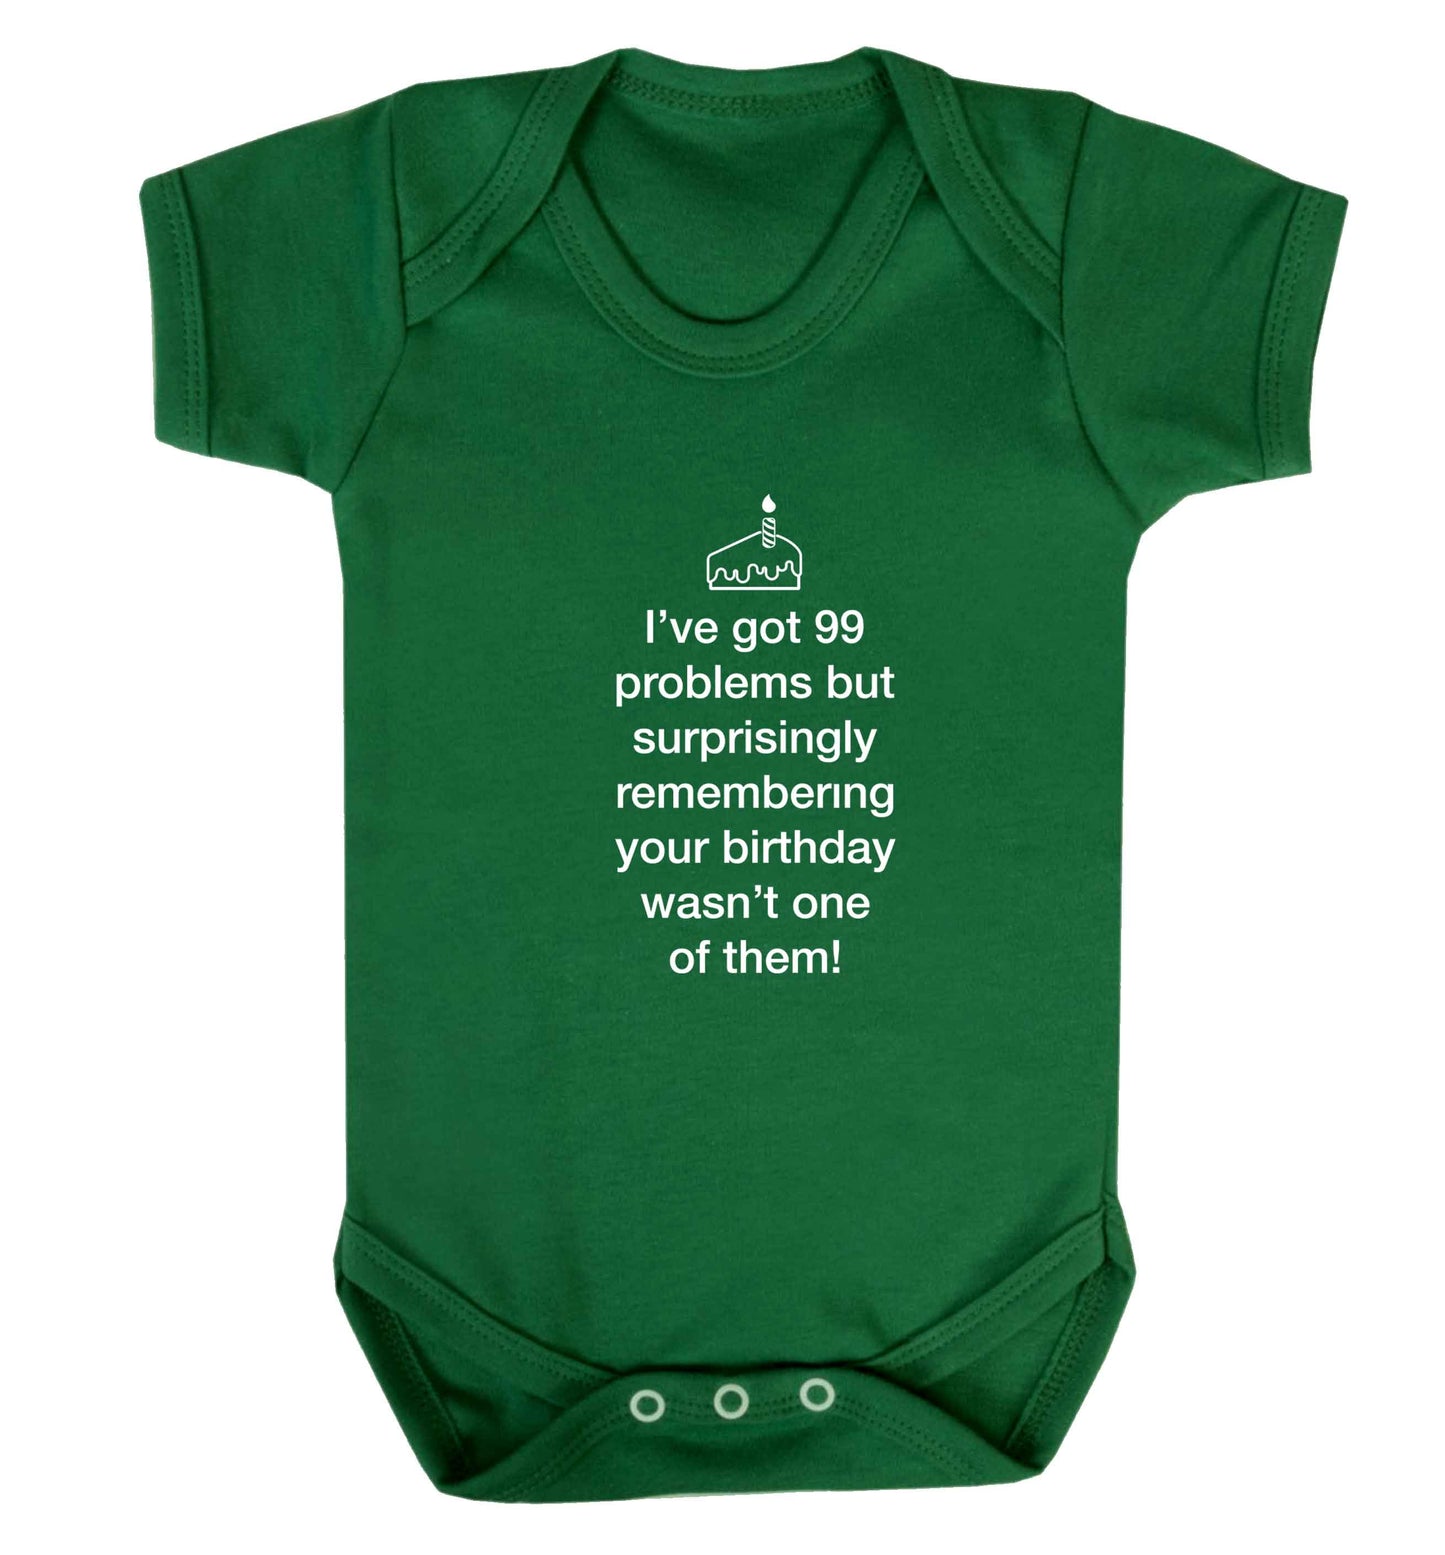 I've got 99 problems but surprisingly remembering your birthday wasn't one of them! baby vest green 18-24 months